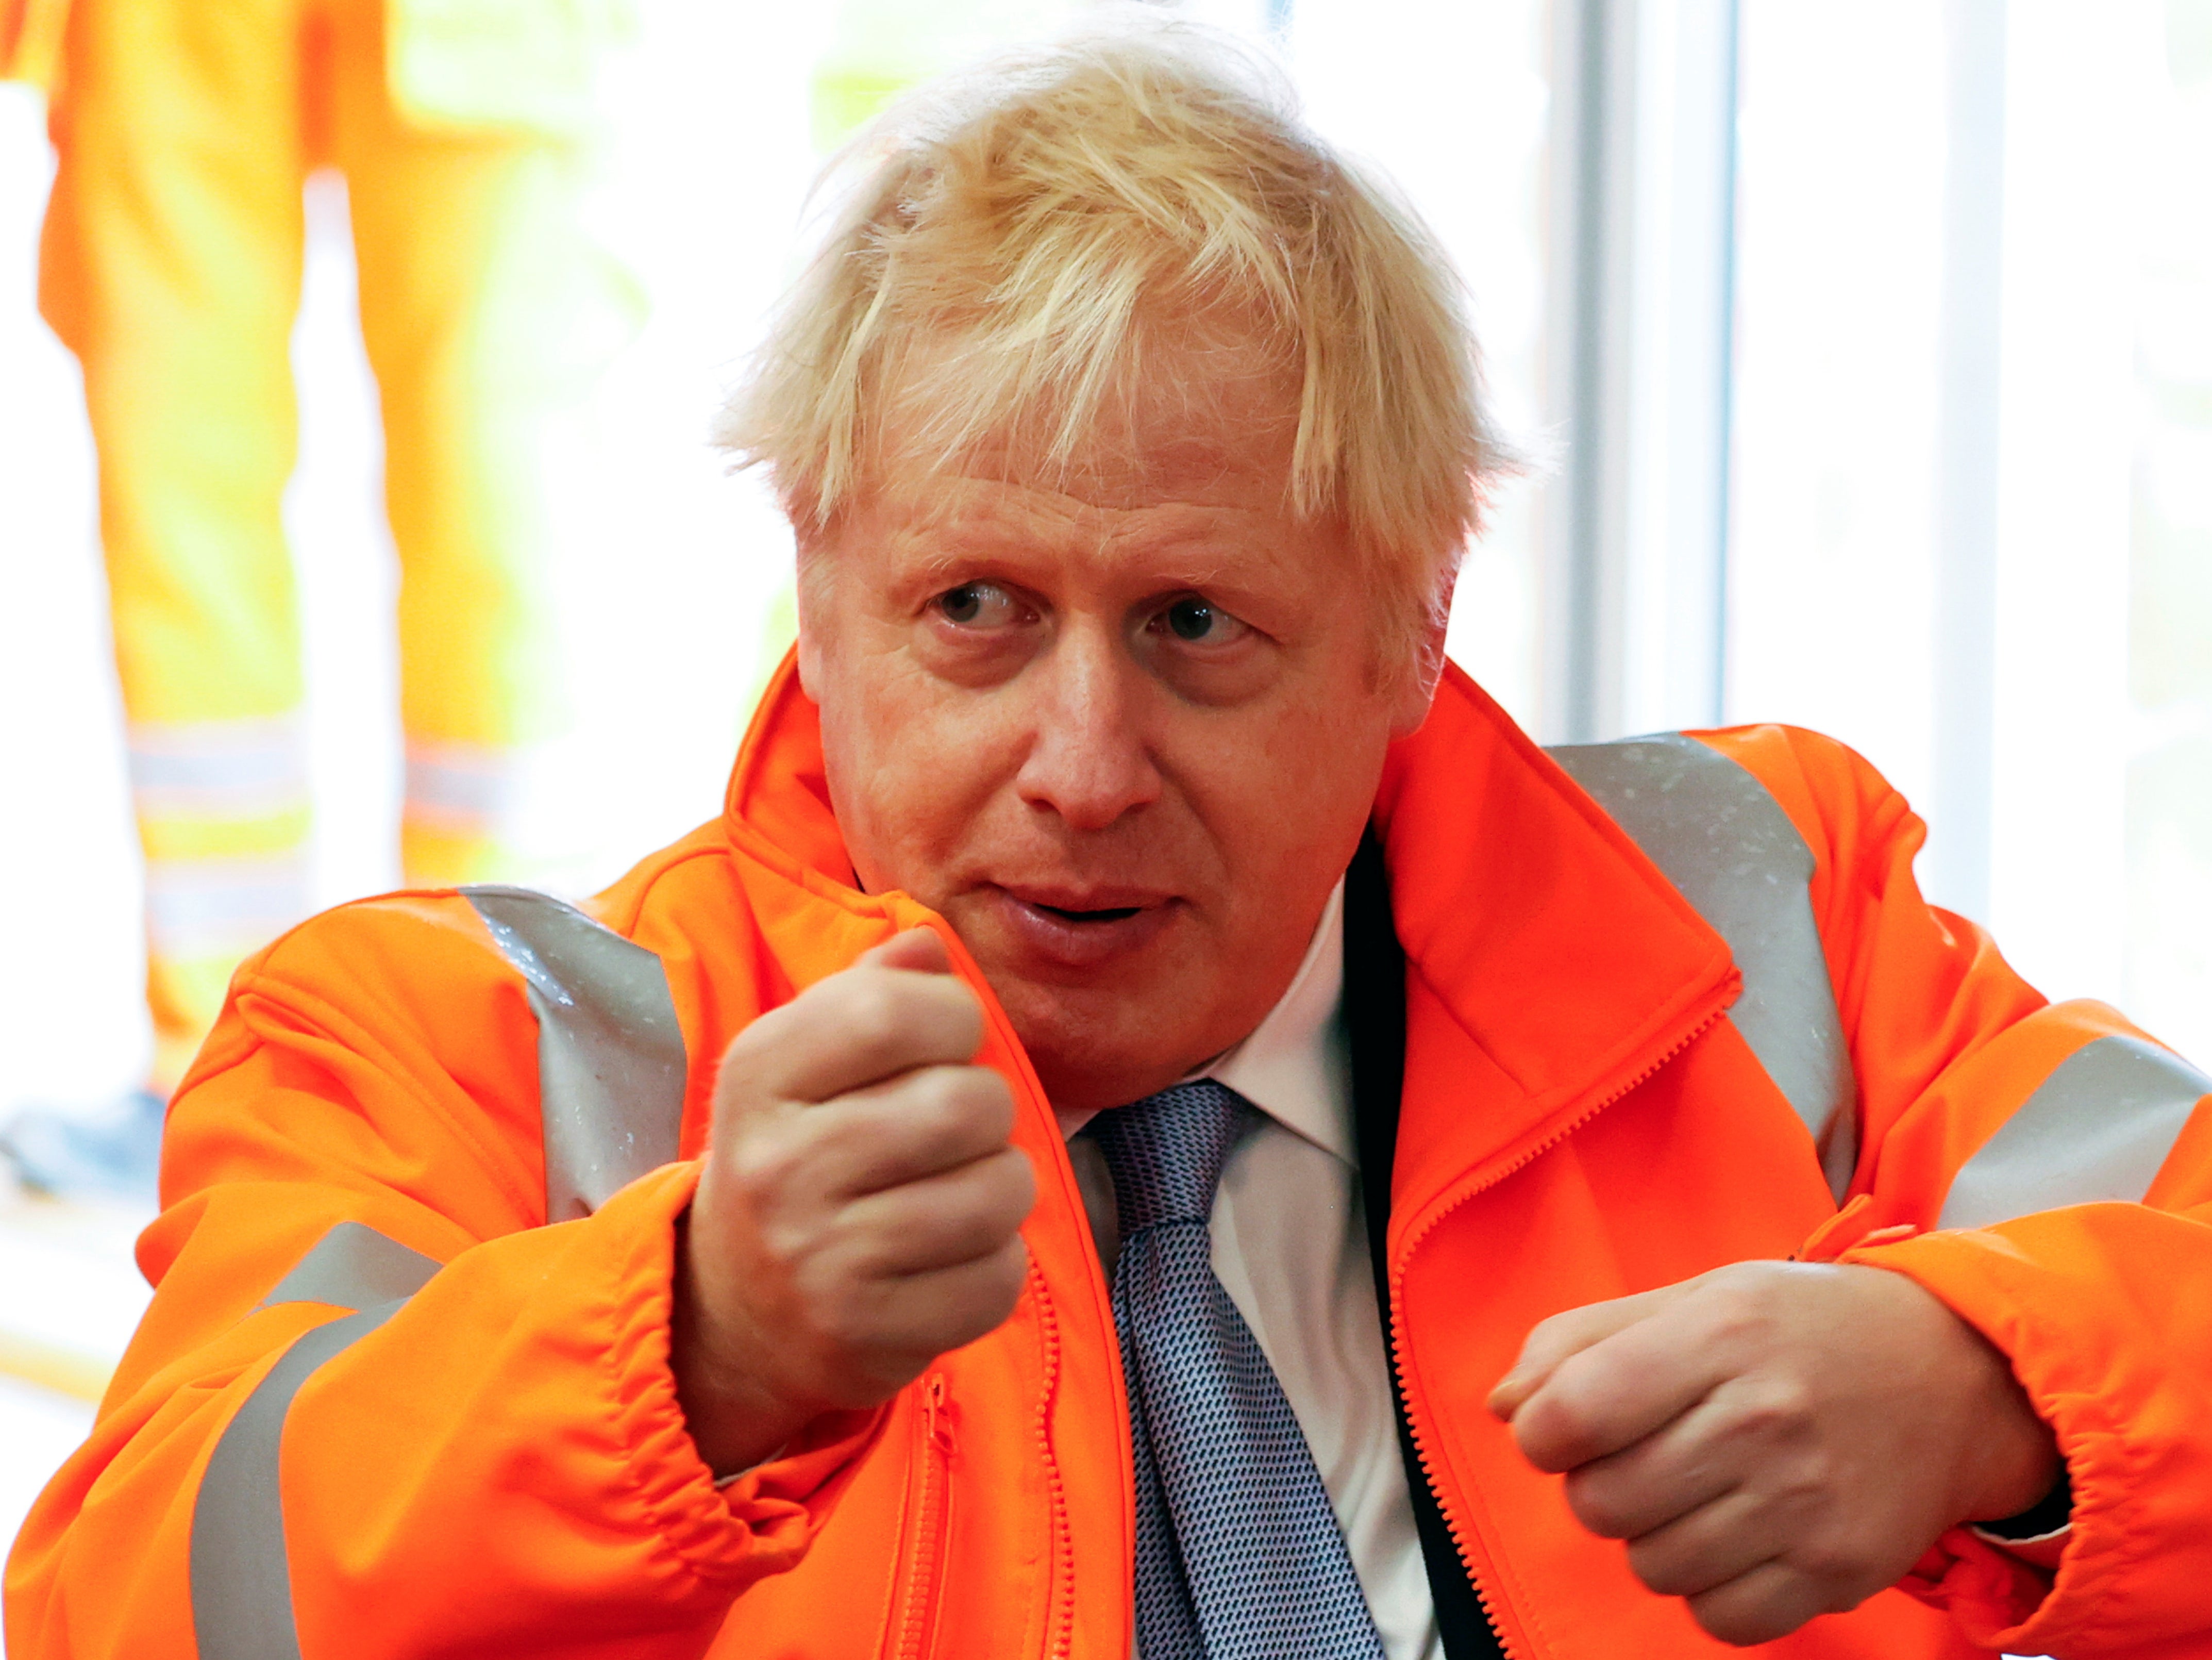 Leading the way, or just a backseat driver? Boris Johnson speaks at a construction site in Manchester on 4 October 2021